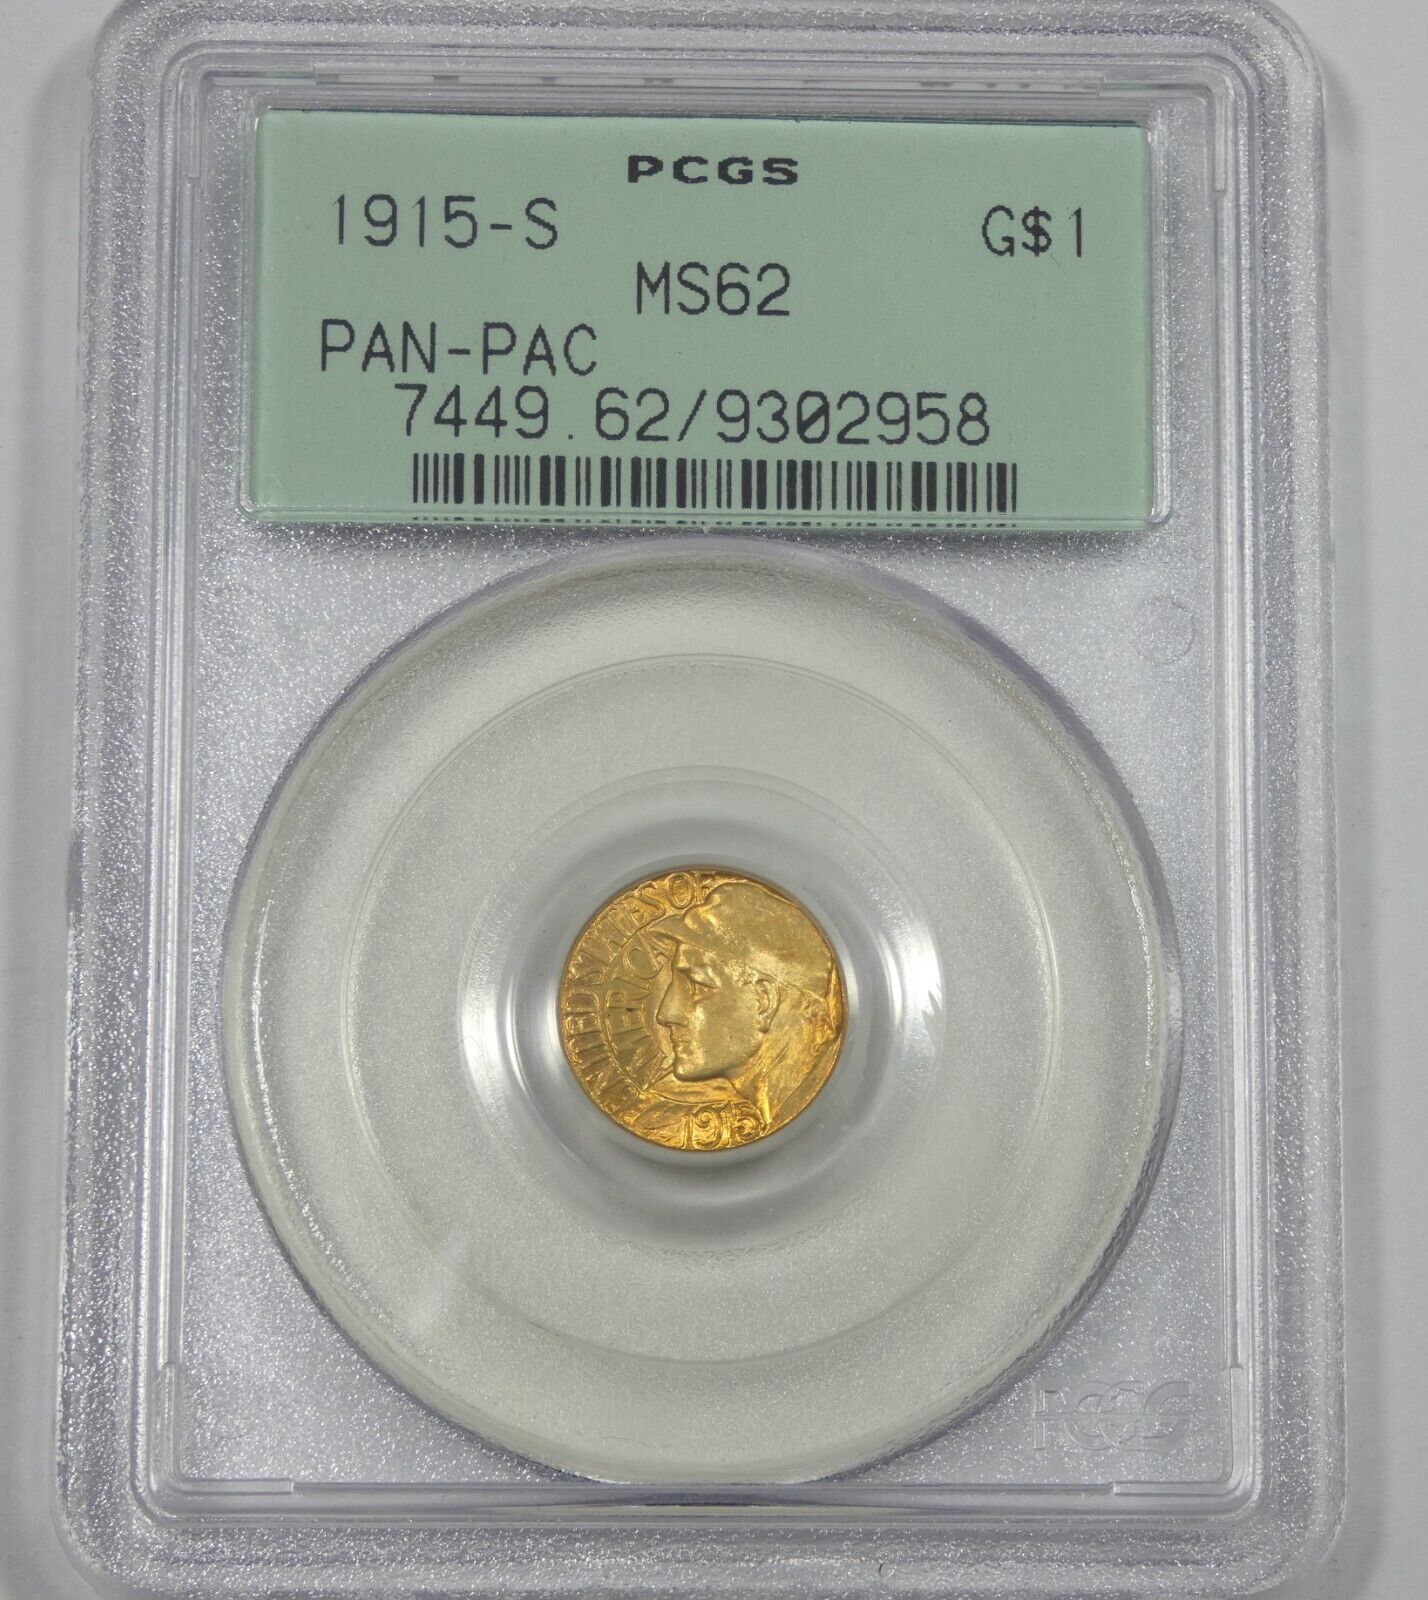 1915-S Pan-Pac Int Expo $1 Gold Commemorative PCGS MS 62 Old Green Holder